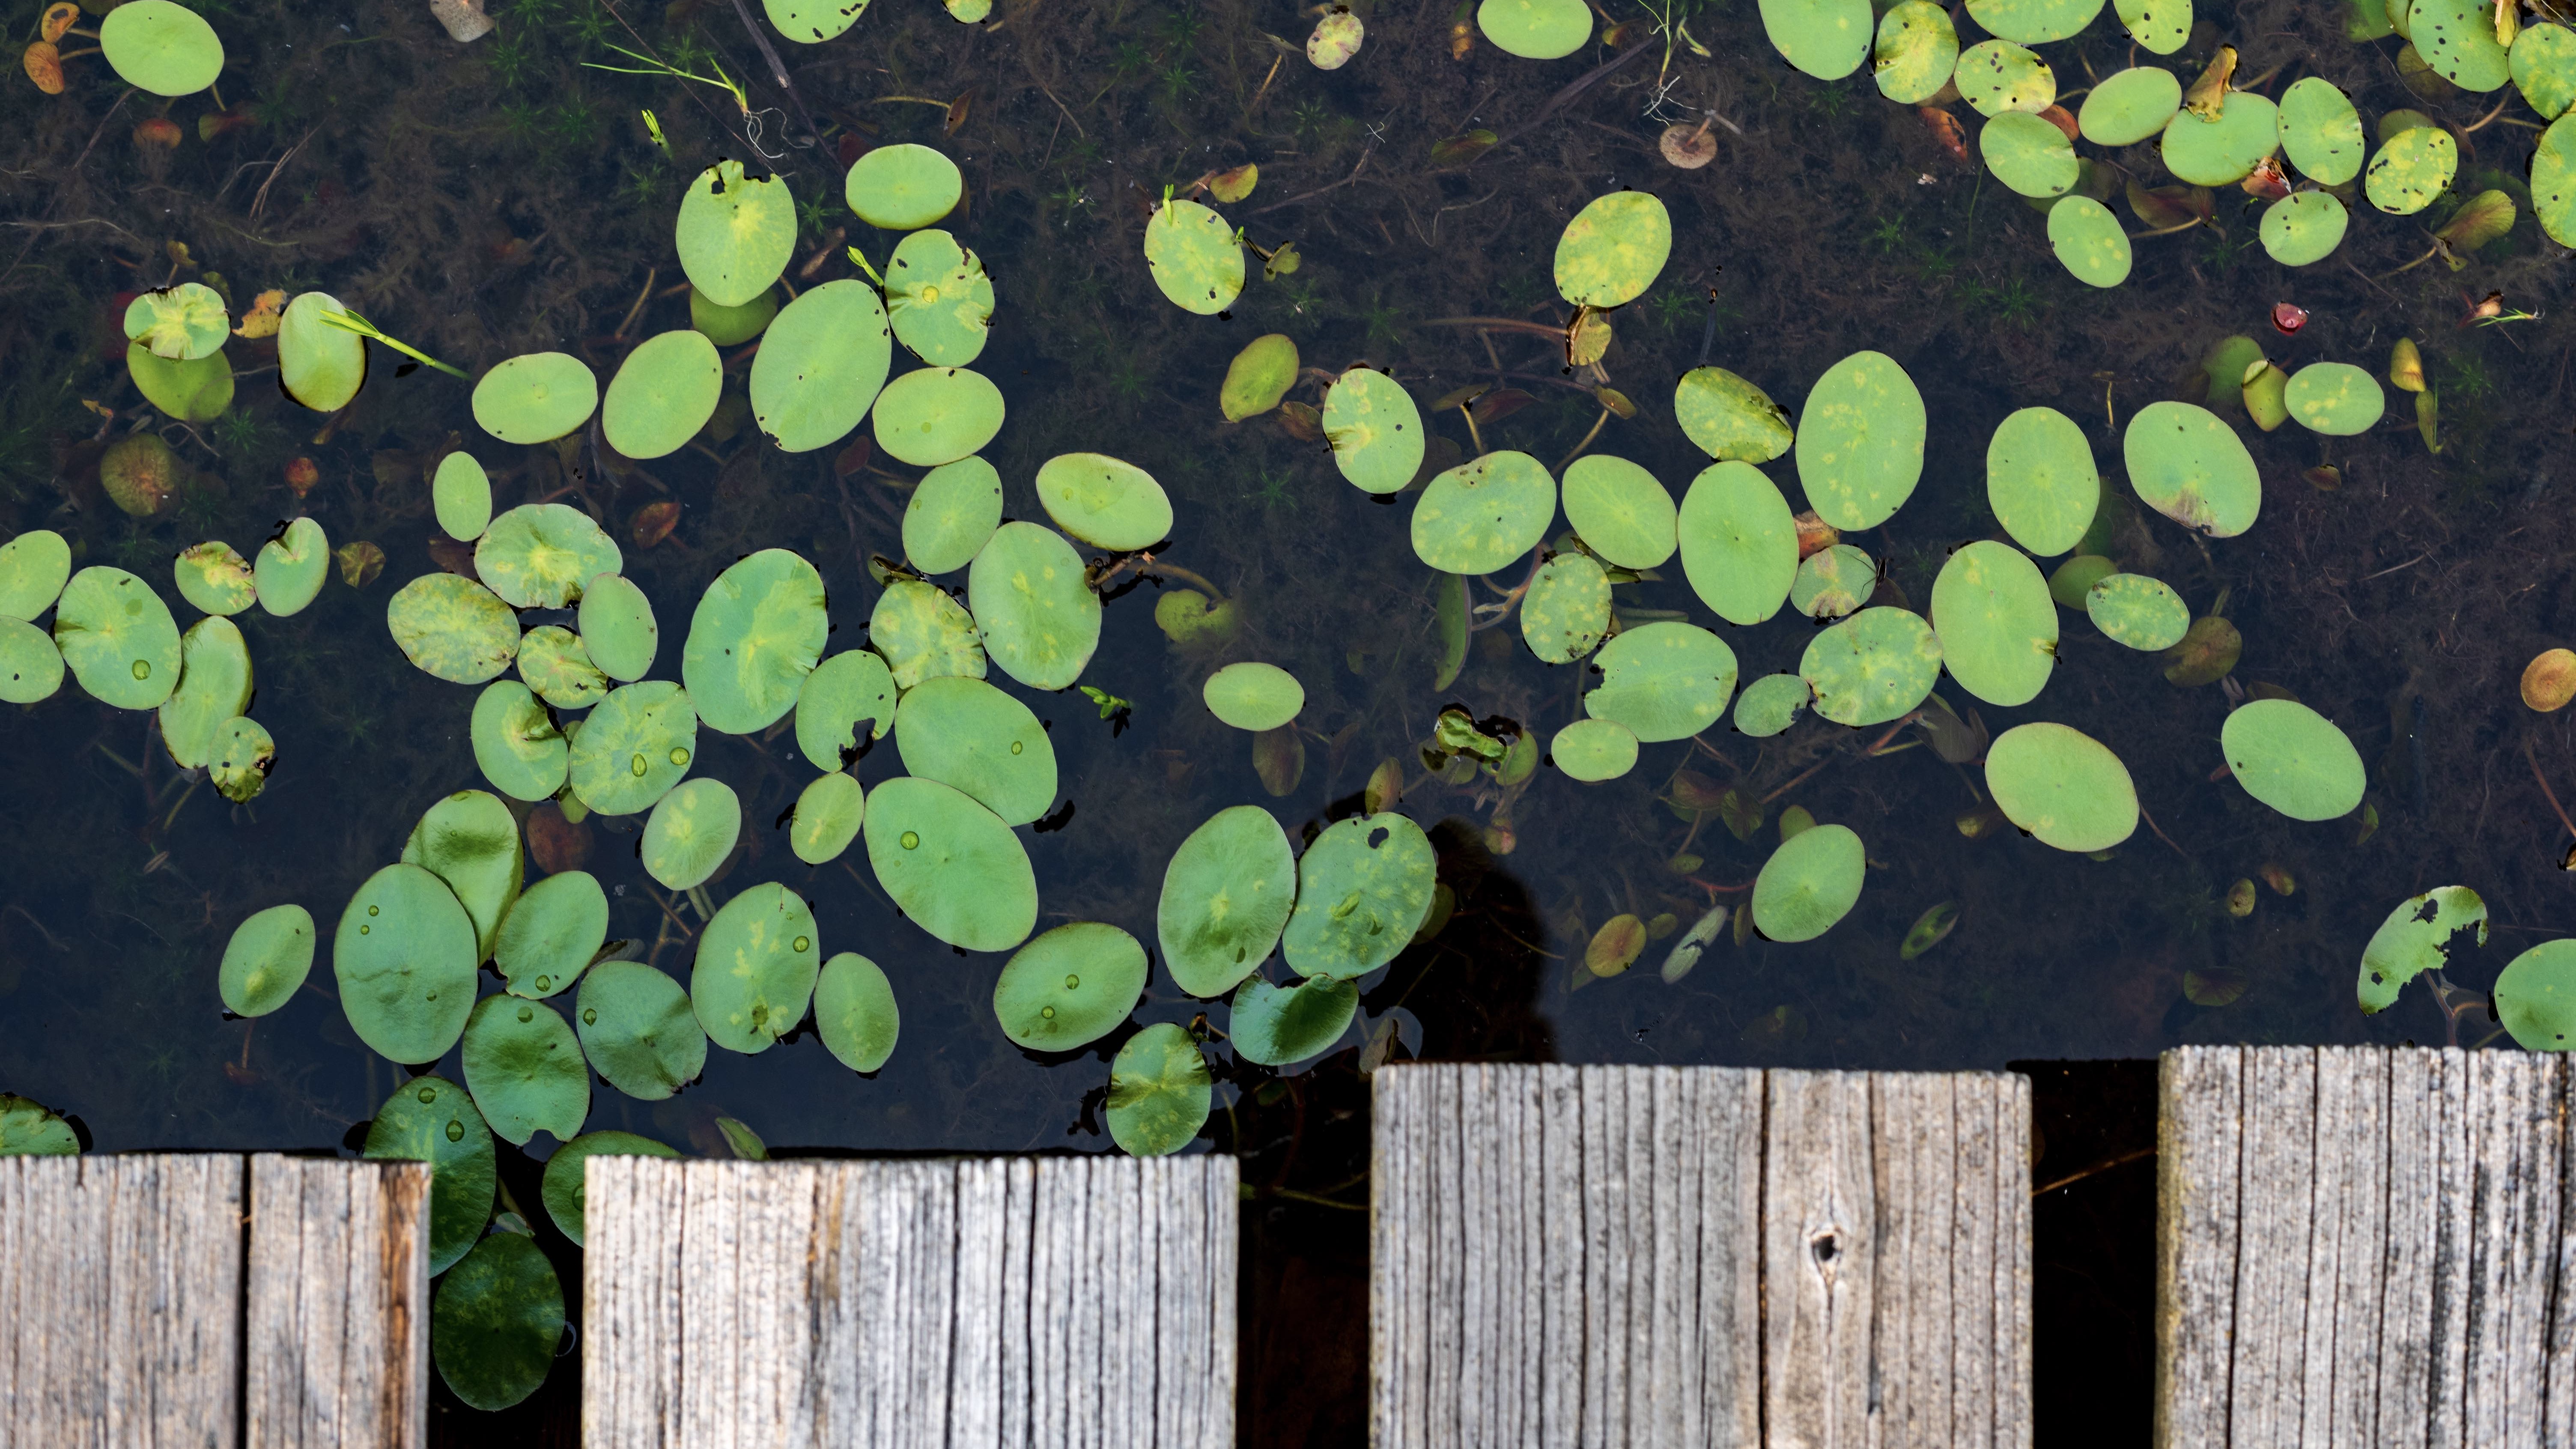 View over a wooden dock looking down at a pond with many oval water plants floating on the surface. 